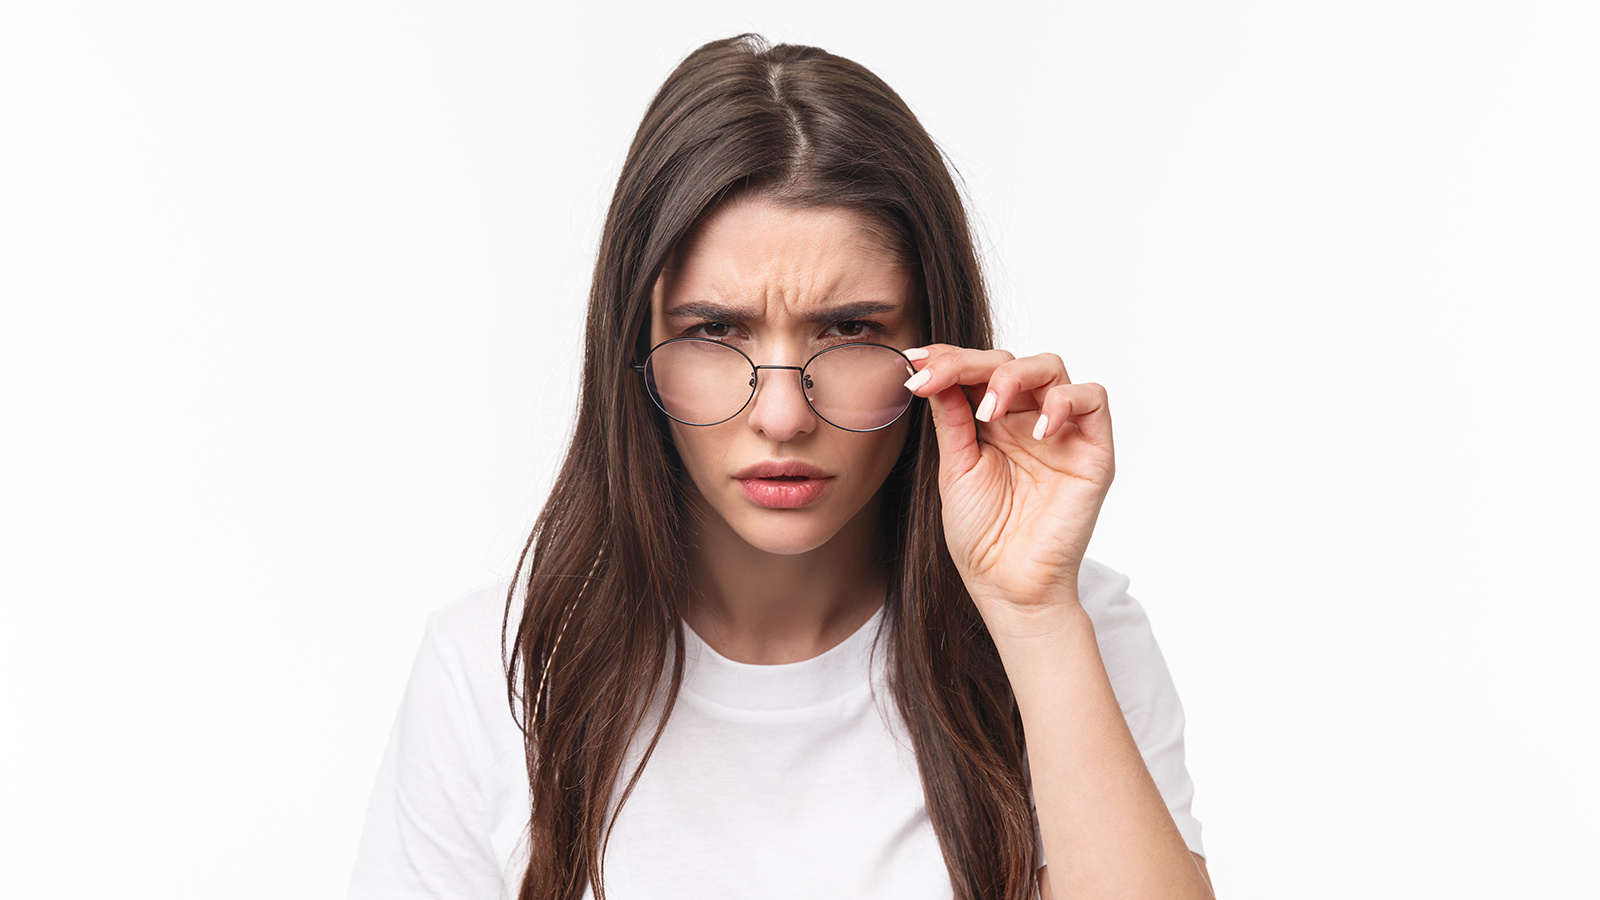 Close-up portrait of suspicious young serious-looking woman, look from under glasses, squinting at person with judgemental disbelief stare, standing white background, have doubts